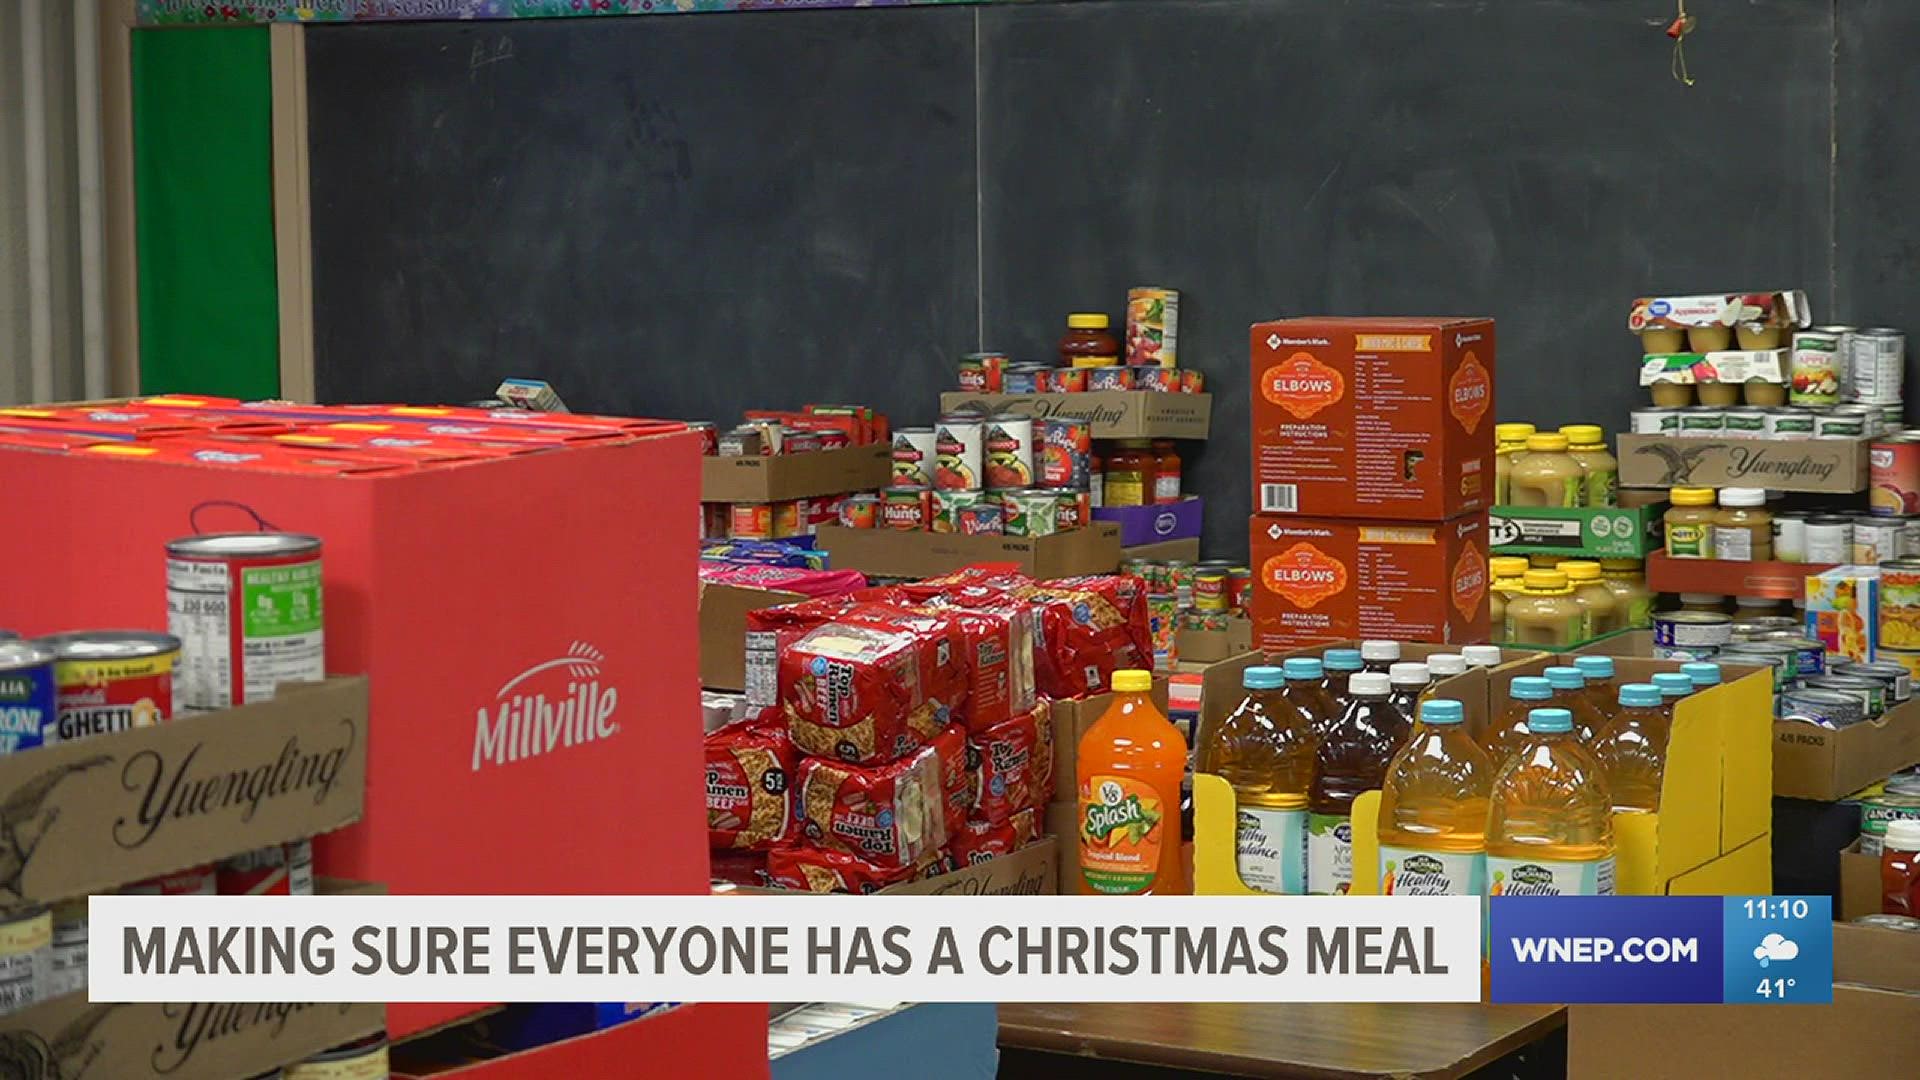 Volunteers in part of Schuylkill County are working to make sure everyone in their community gets to enjoy a Christmas meal.